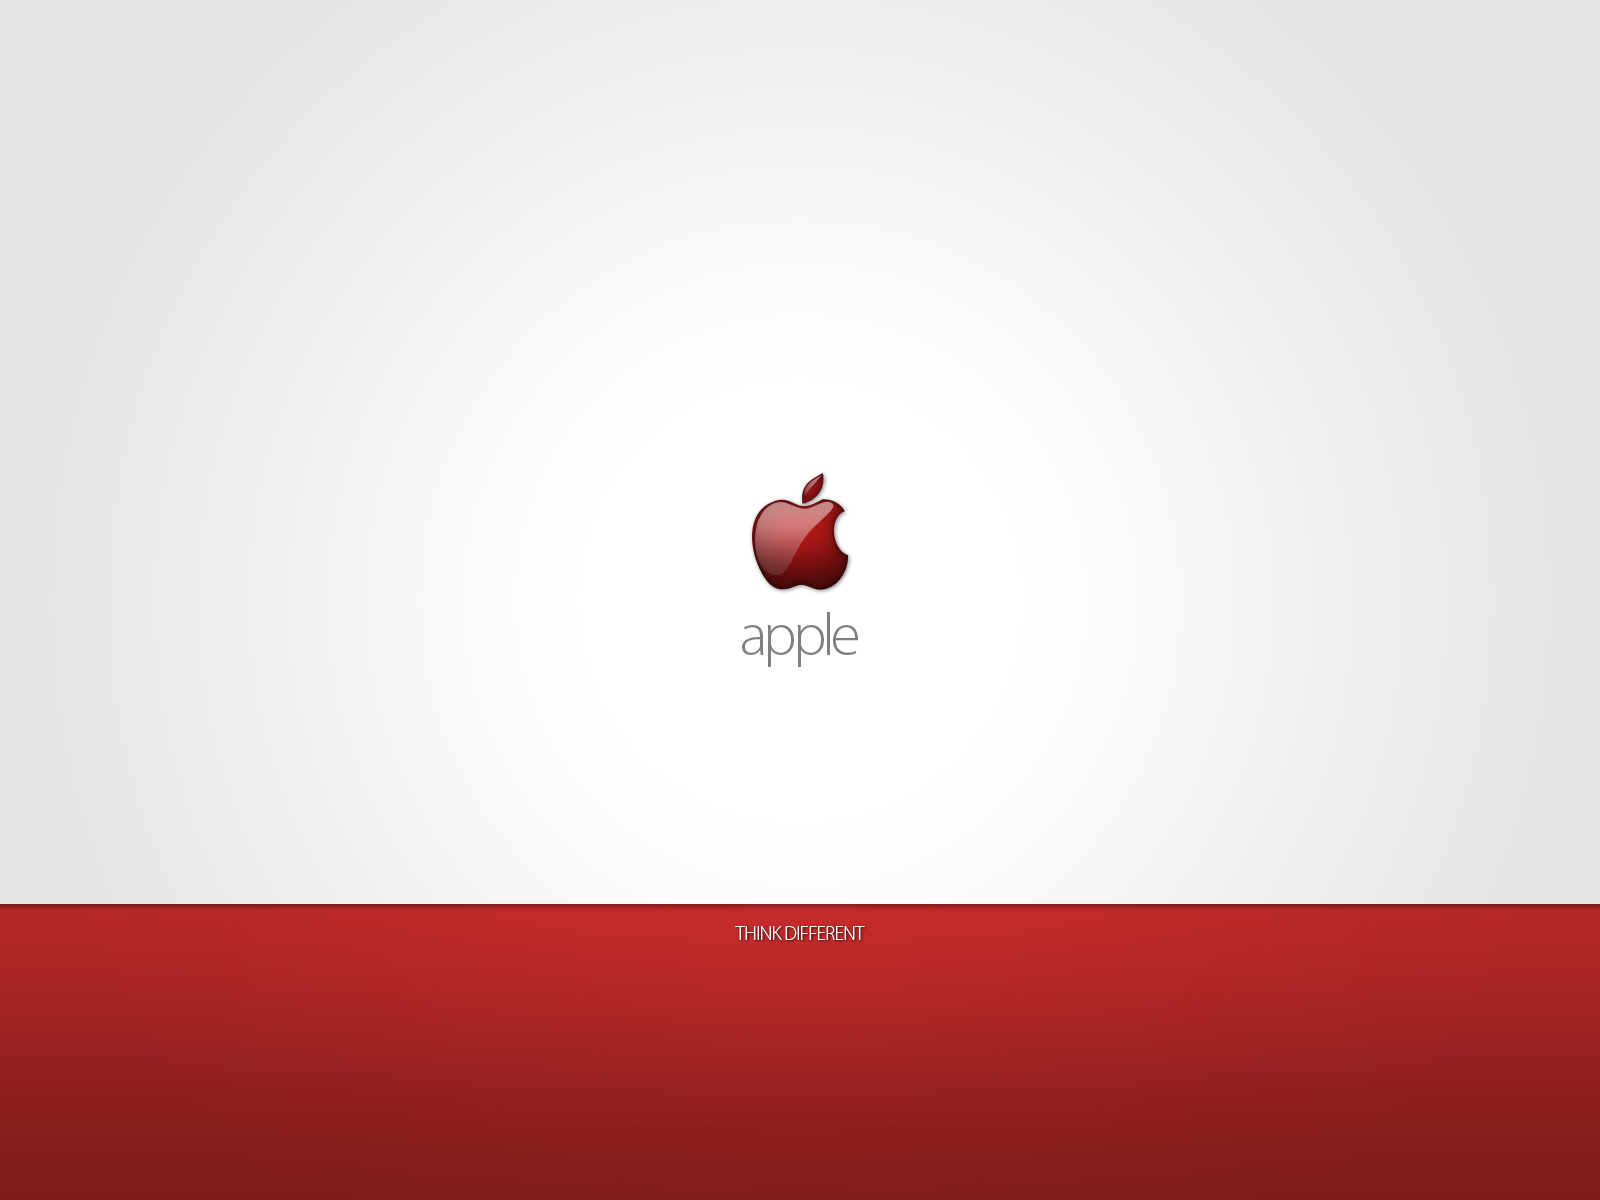 Think Different Wallpaper Red Apple Stock Photos